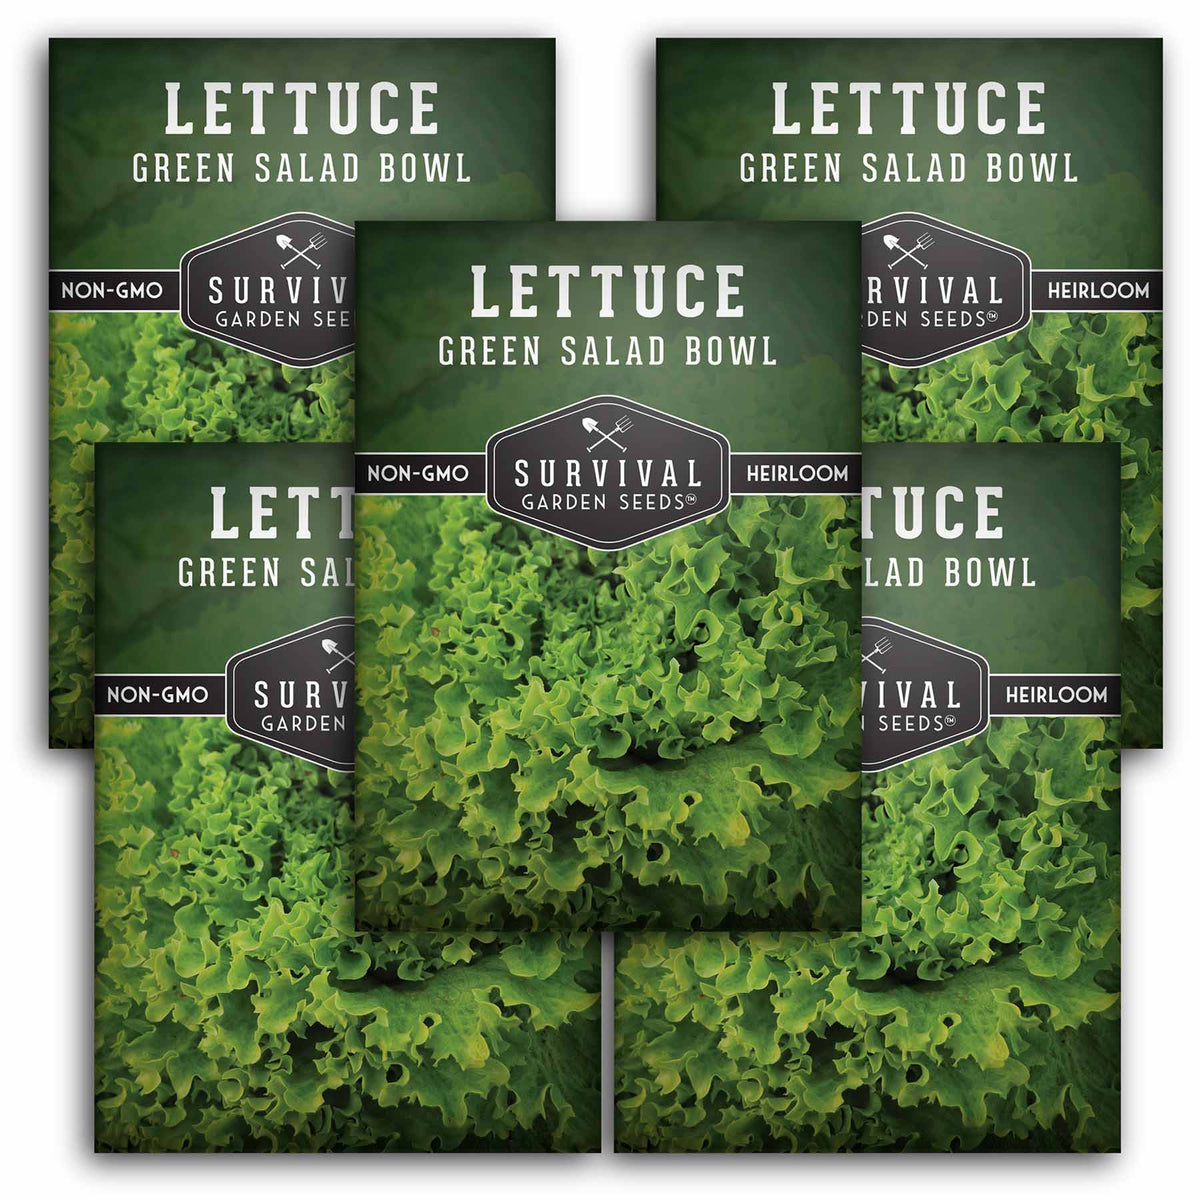 5 packets of Green Salad Bowl Lettuce seeds